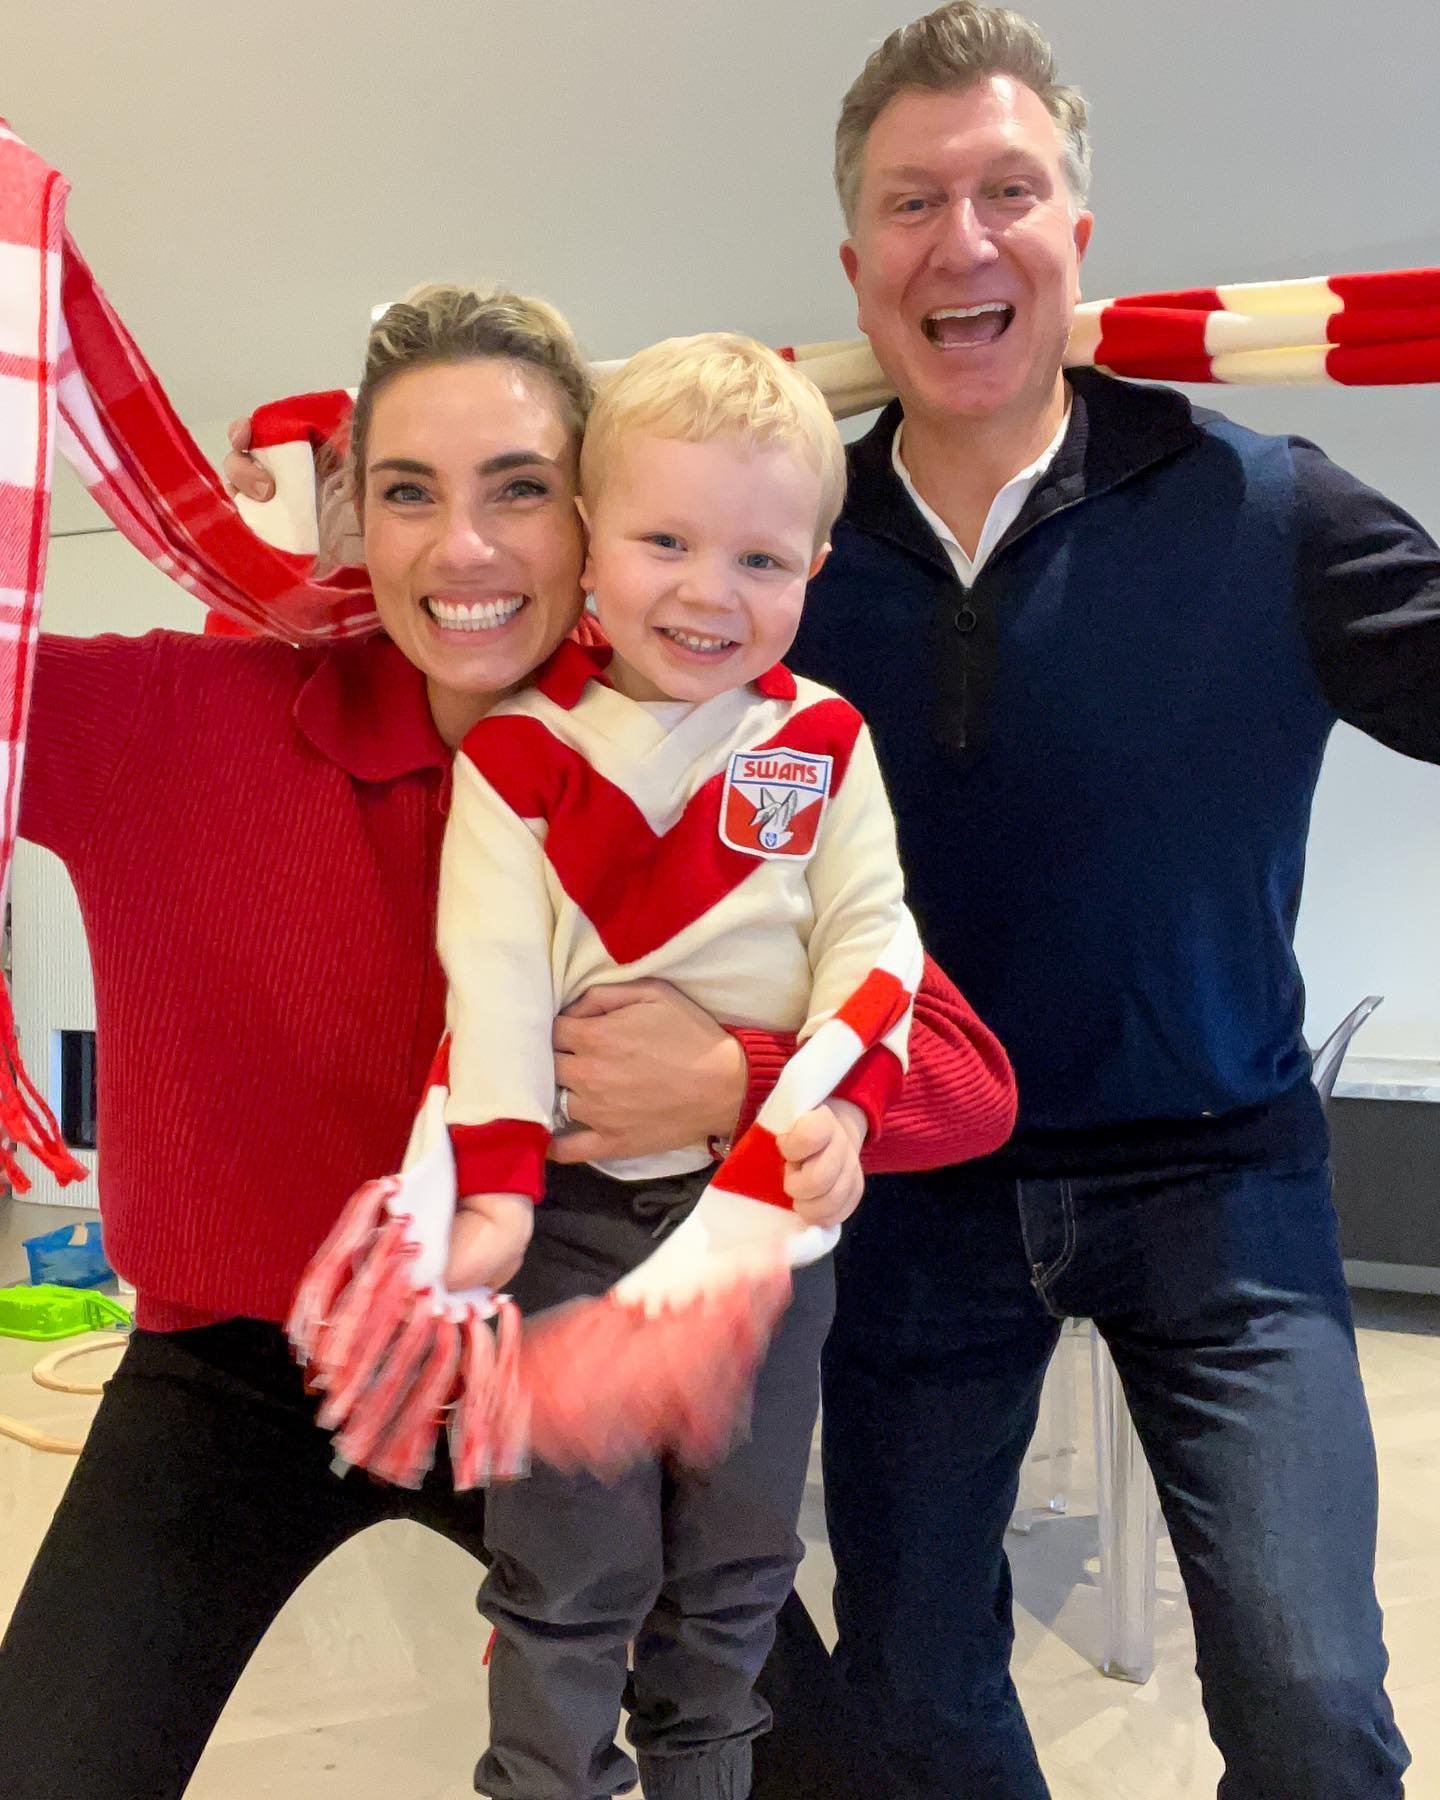 Cheer cheer the red and the white! ❤️🏉🤍 #bloods 
I didn&rsquo;t realise how easy it was to get a self timed family photo&hellip; Said no toddler parent, ever! 😆
Last photo is the best pic of the day 🥰🍦